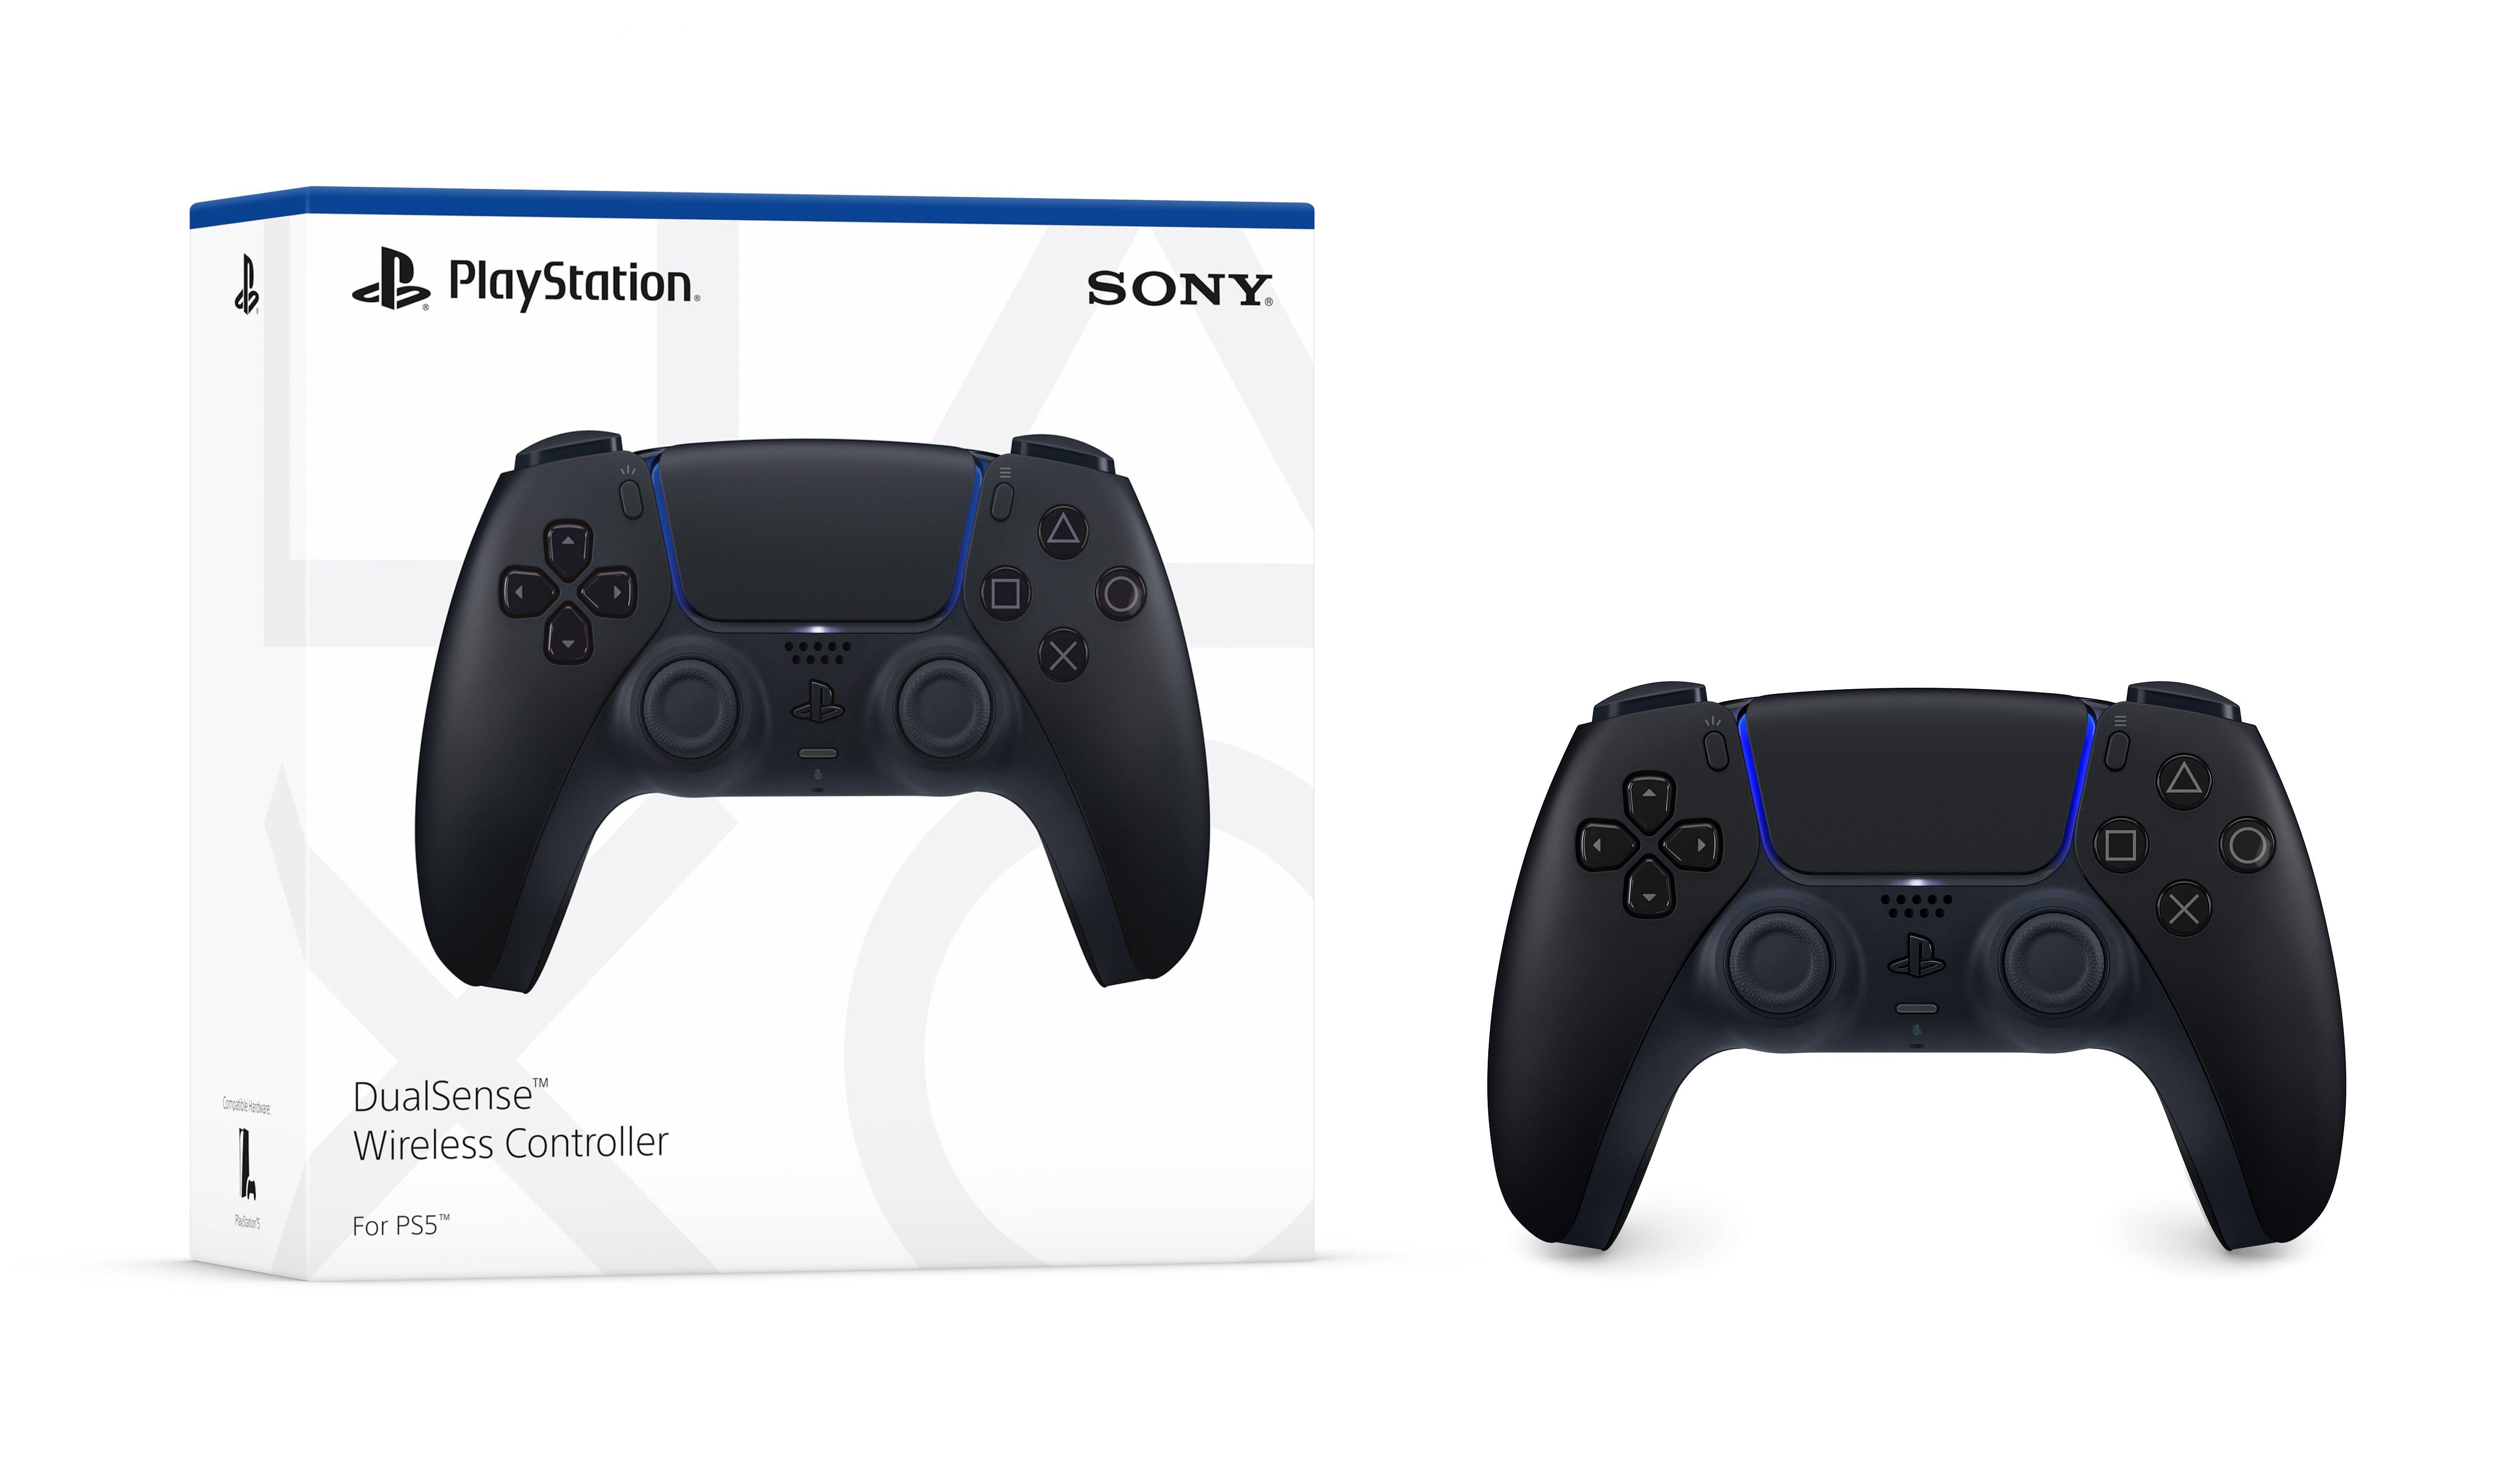 Playstation DualSense Wireless Controller, For PS5